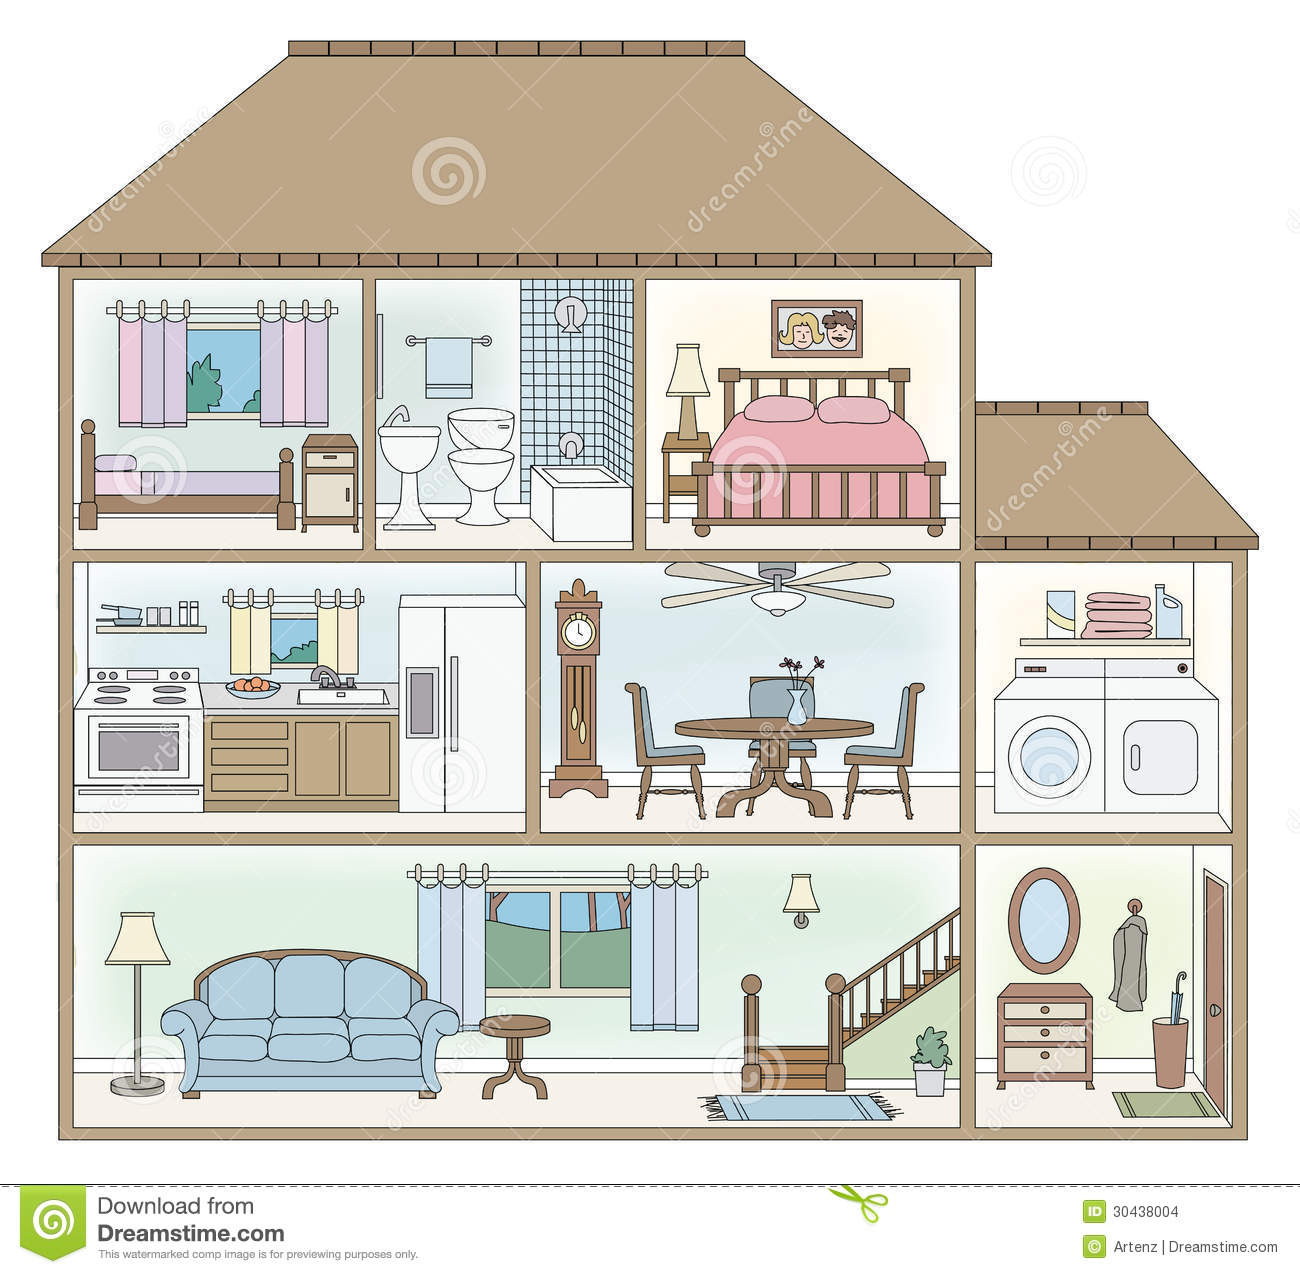 House images free clip. Apartment clipart cute